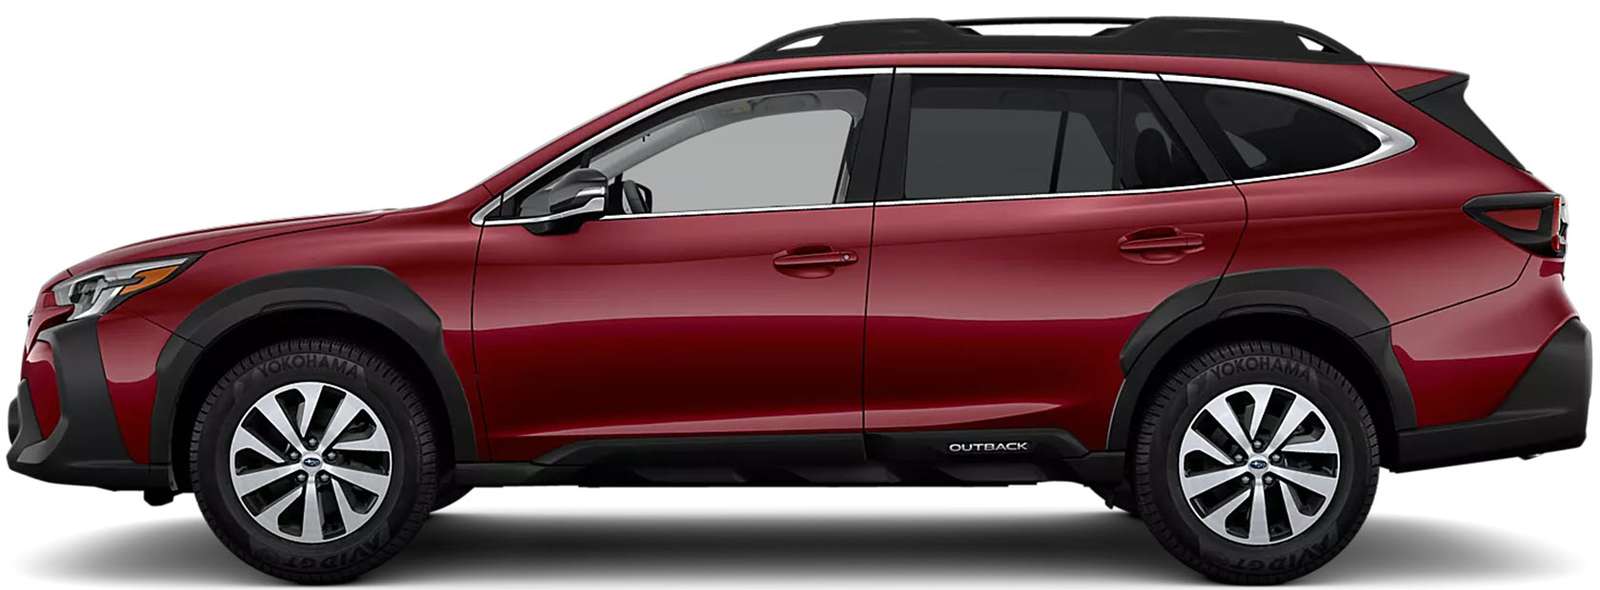 Roter Subaru Outback Online-Puzzle vom Foto